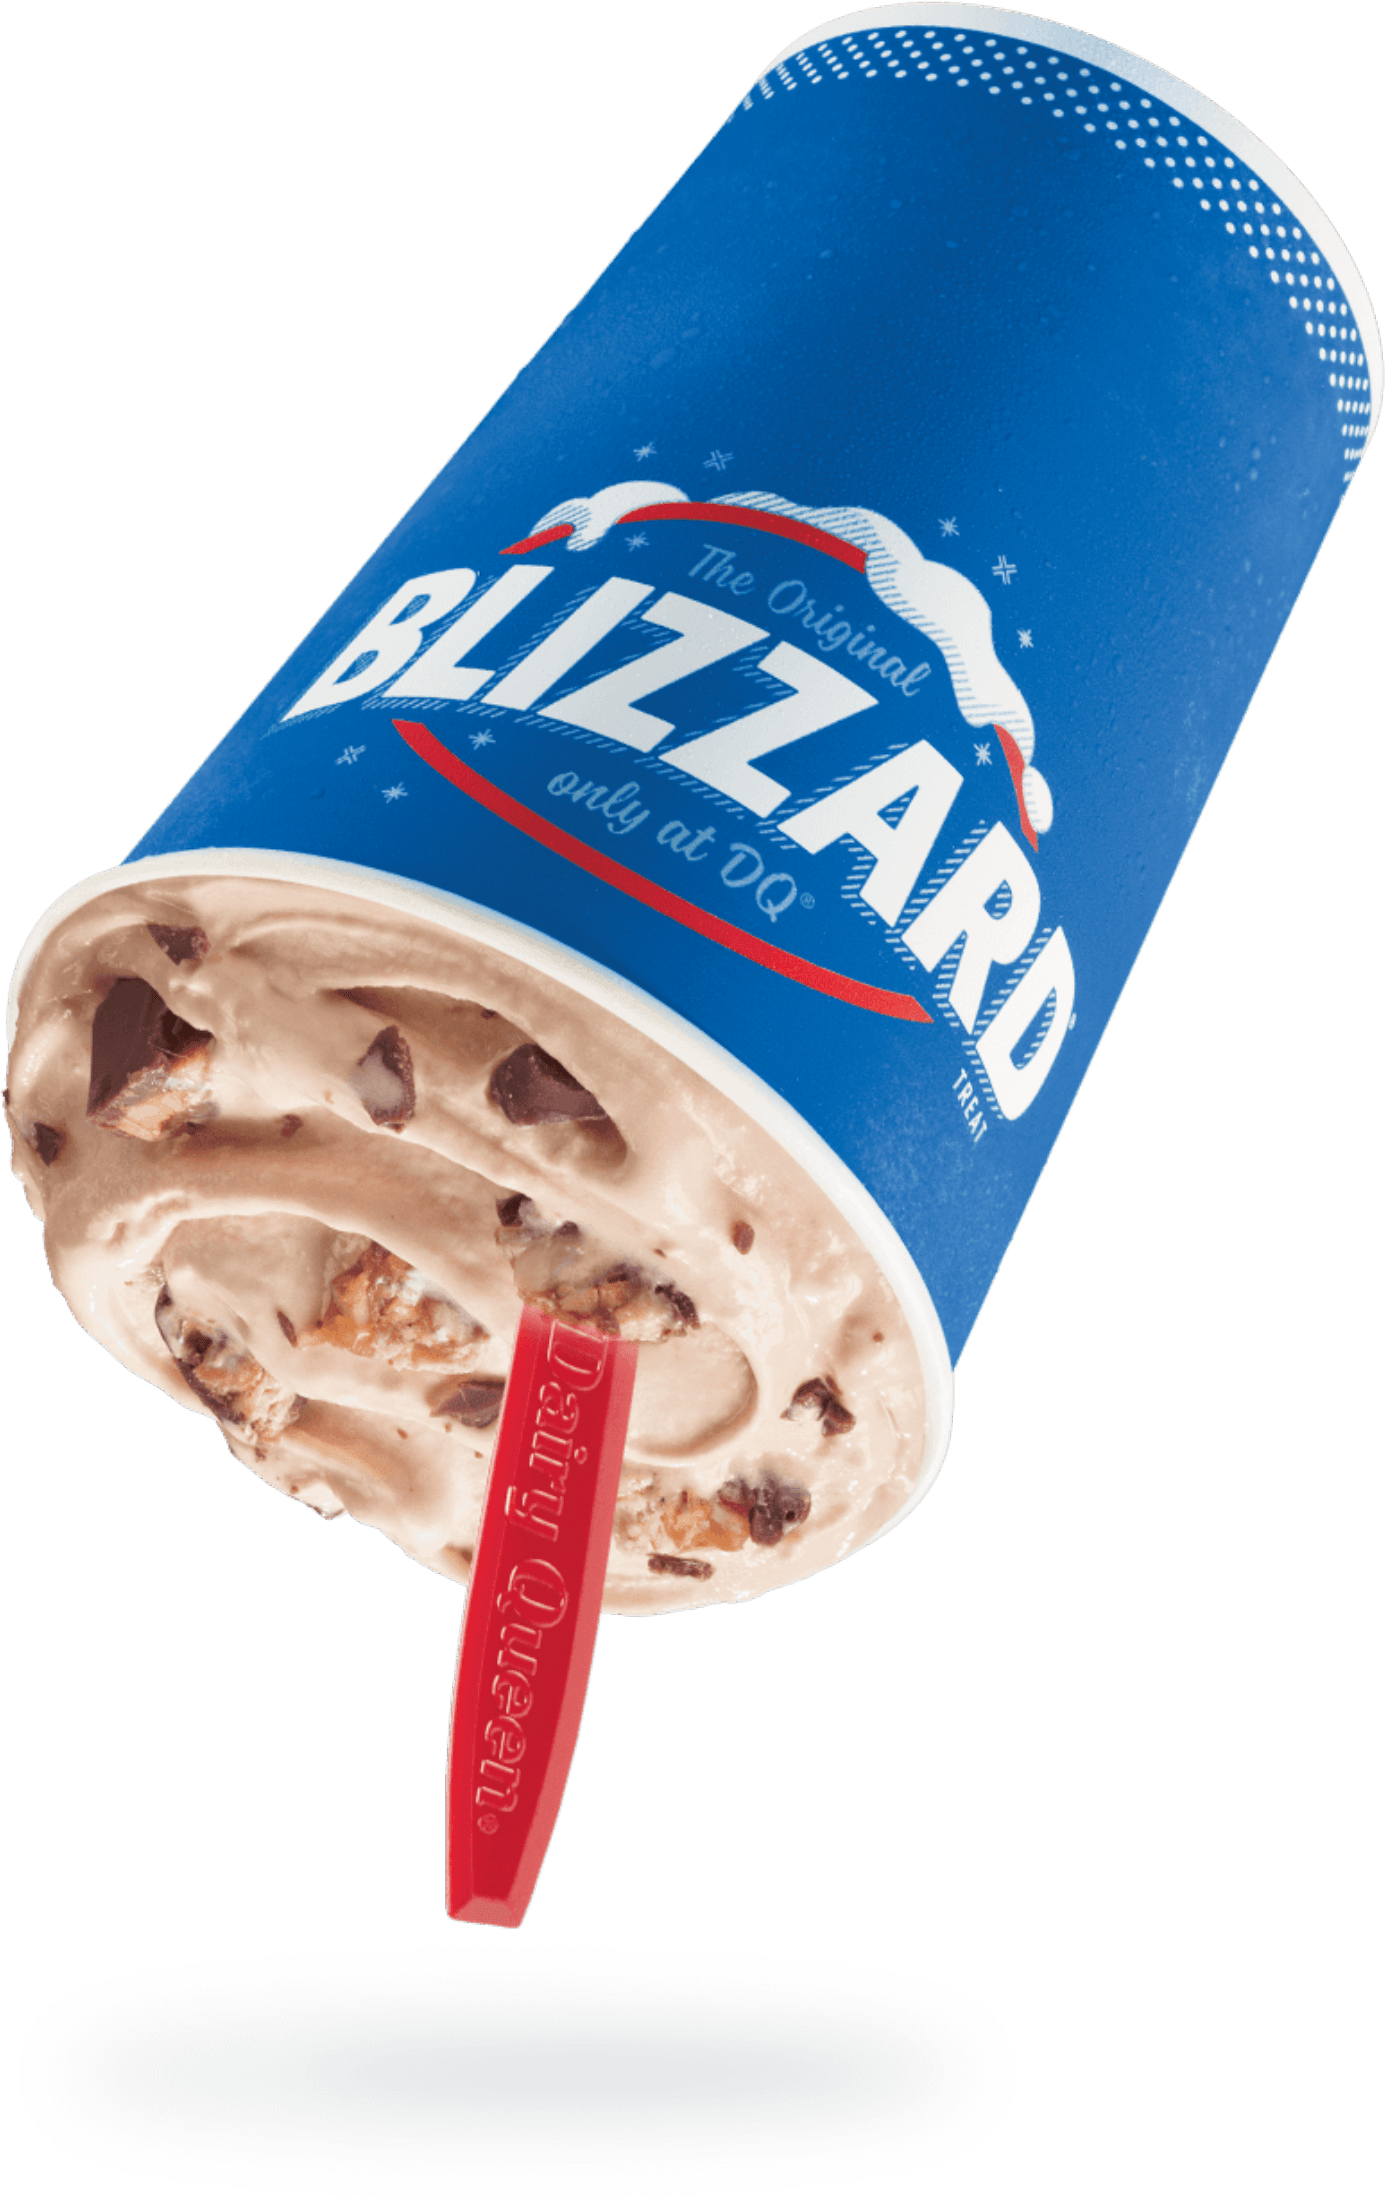 Dairy Queen Mini Snickers Brownie Blizzard Nutrition Facts